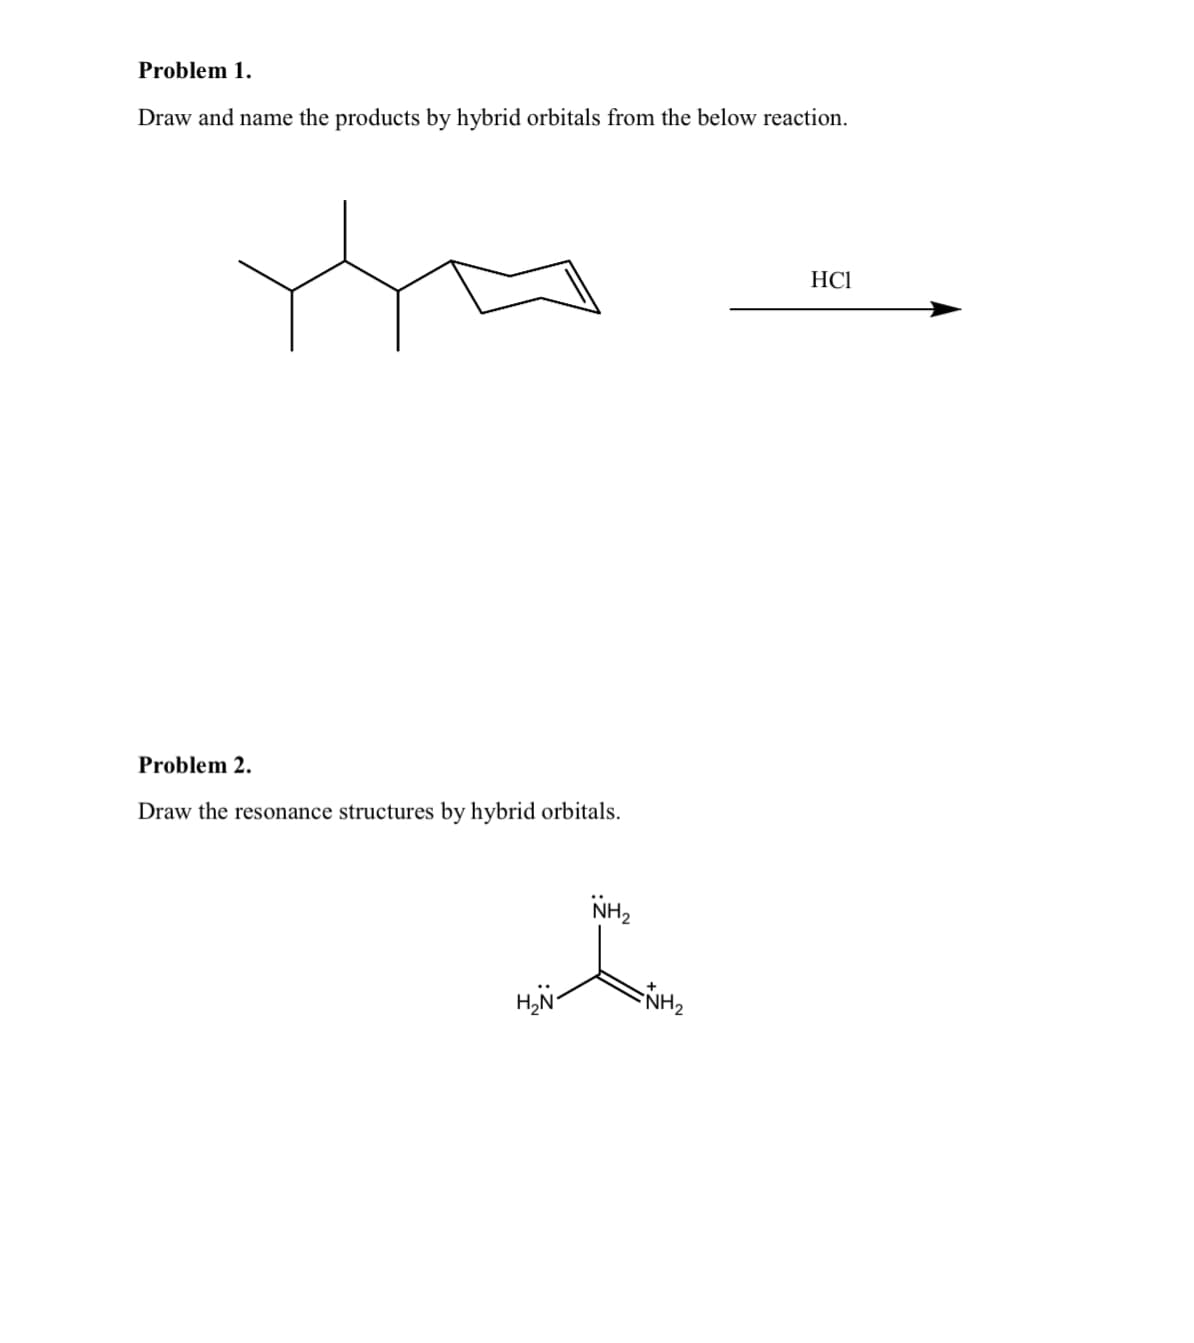 Problem 1.
Draw and name the products by hybrid orbitals from the below reaction.
HCI
Problem 2.
Draw the resonance structures by hybrid orbitals.
NH,
NH2
